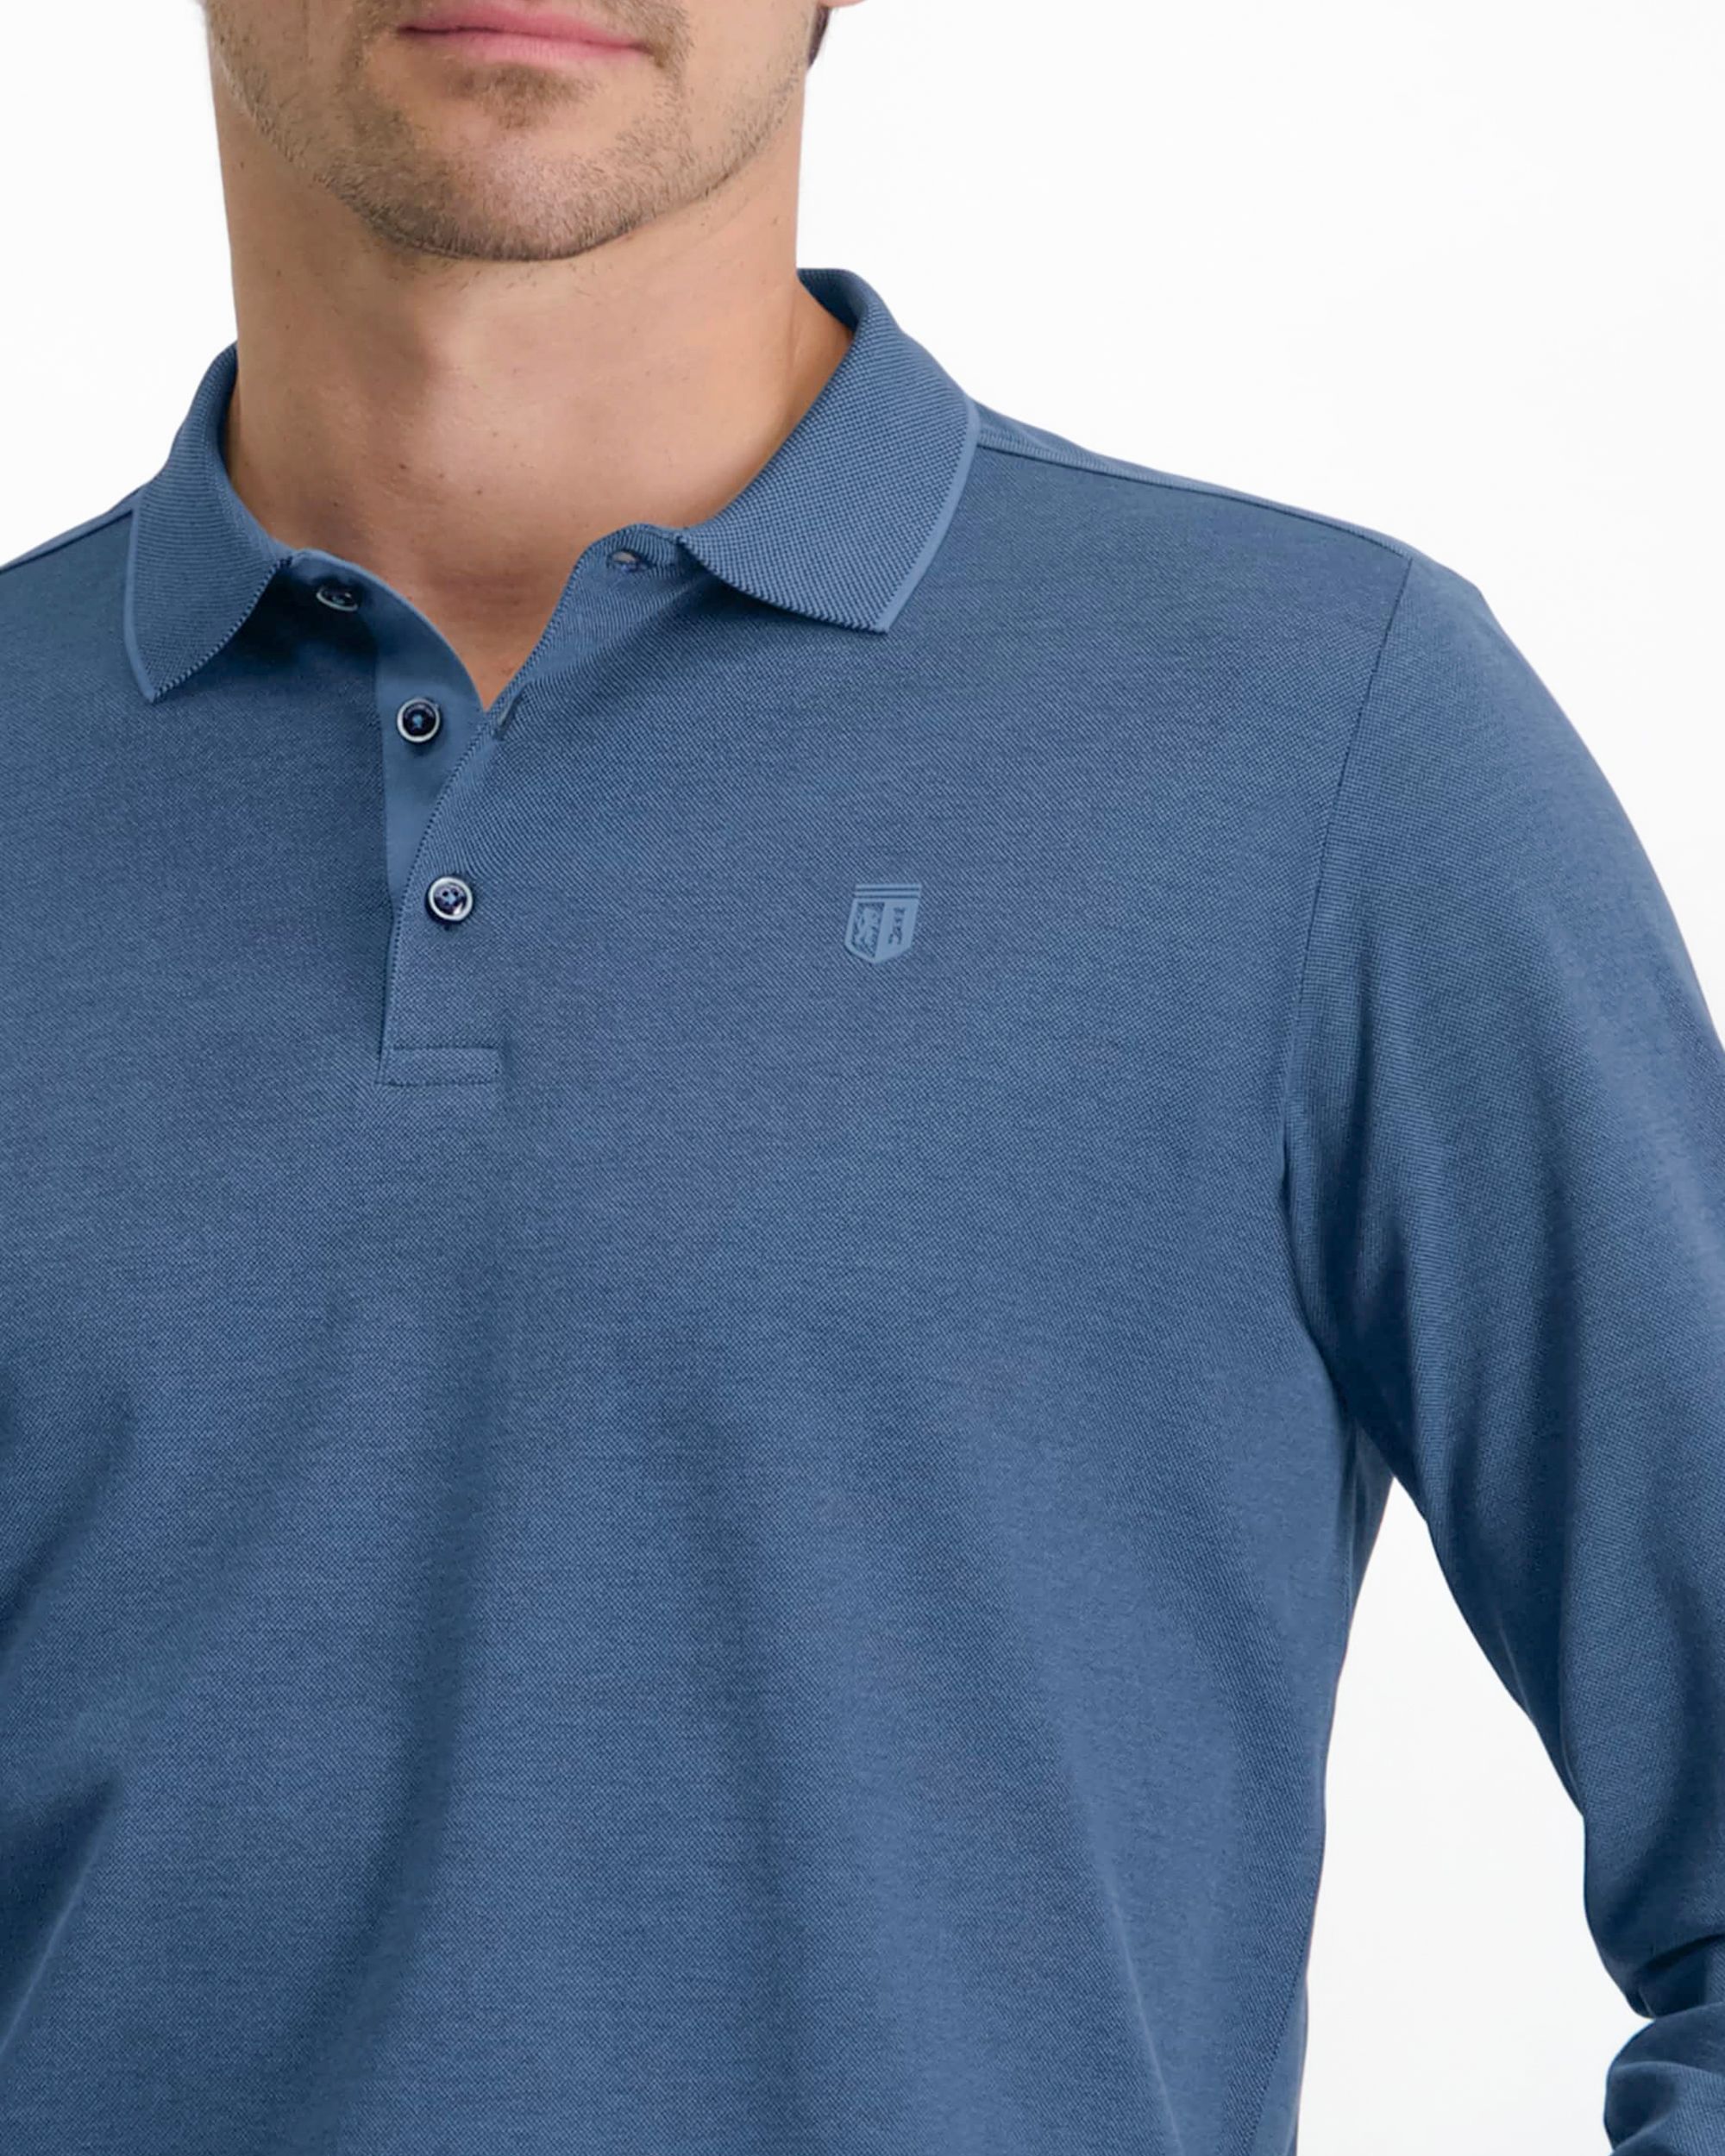 State of Art Polo LM Donker blauw 081202-001-4XL